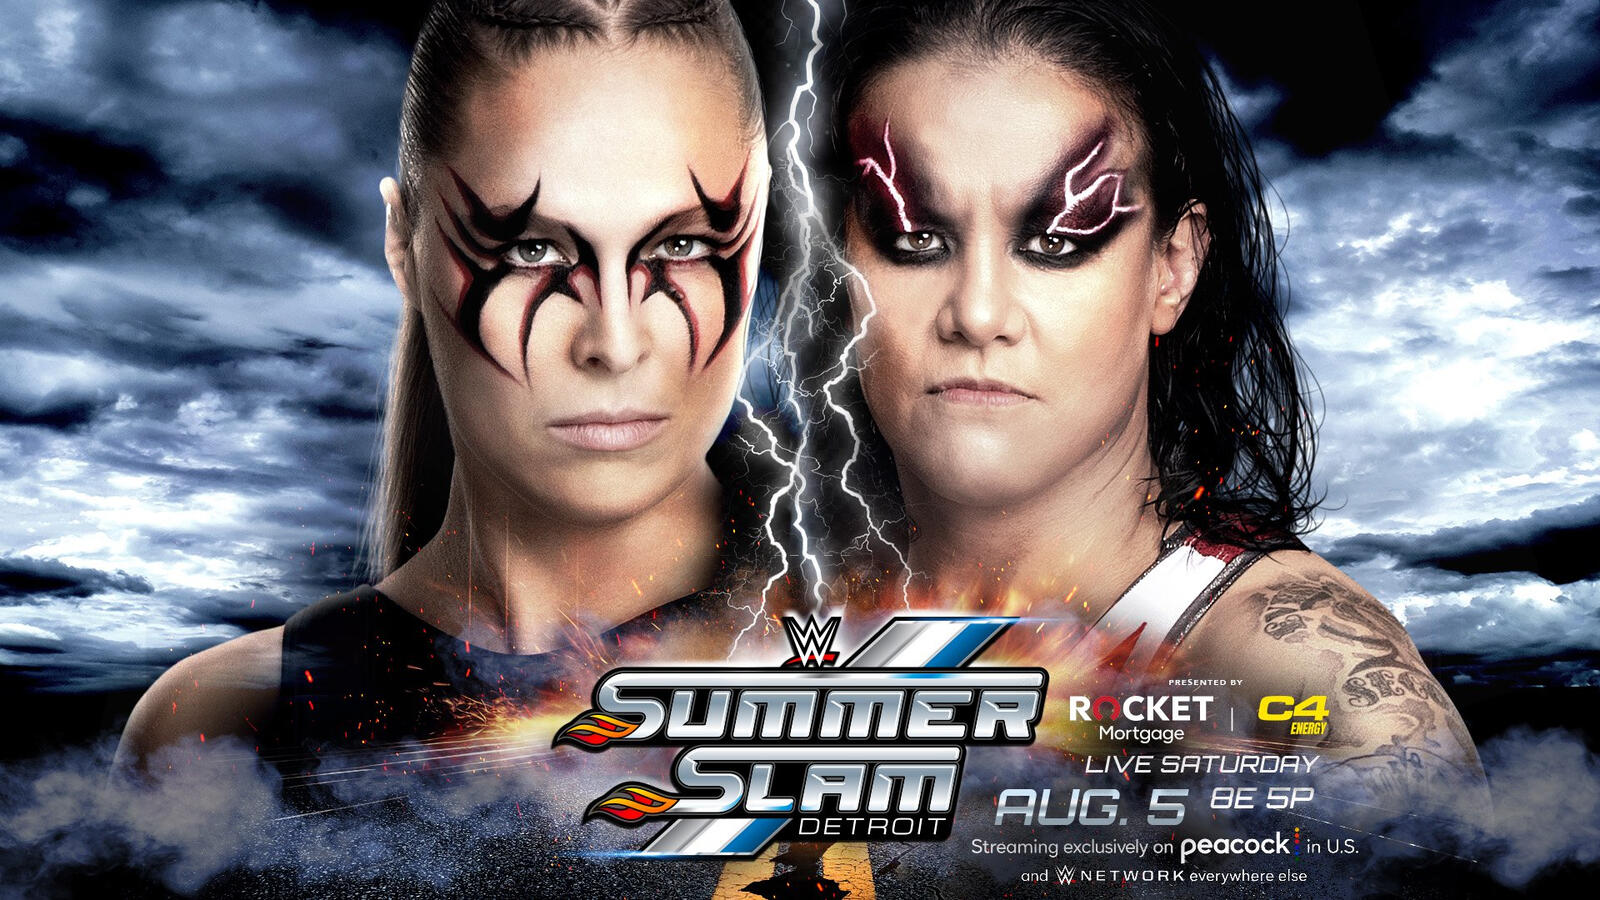 Possible Stipulation For Ronda Rousey And Shayna Baszler “Fight” At WWE SummerSlam